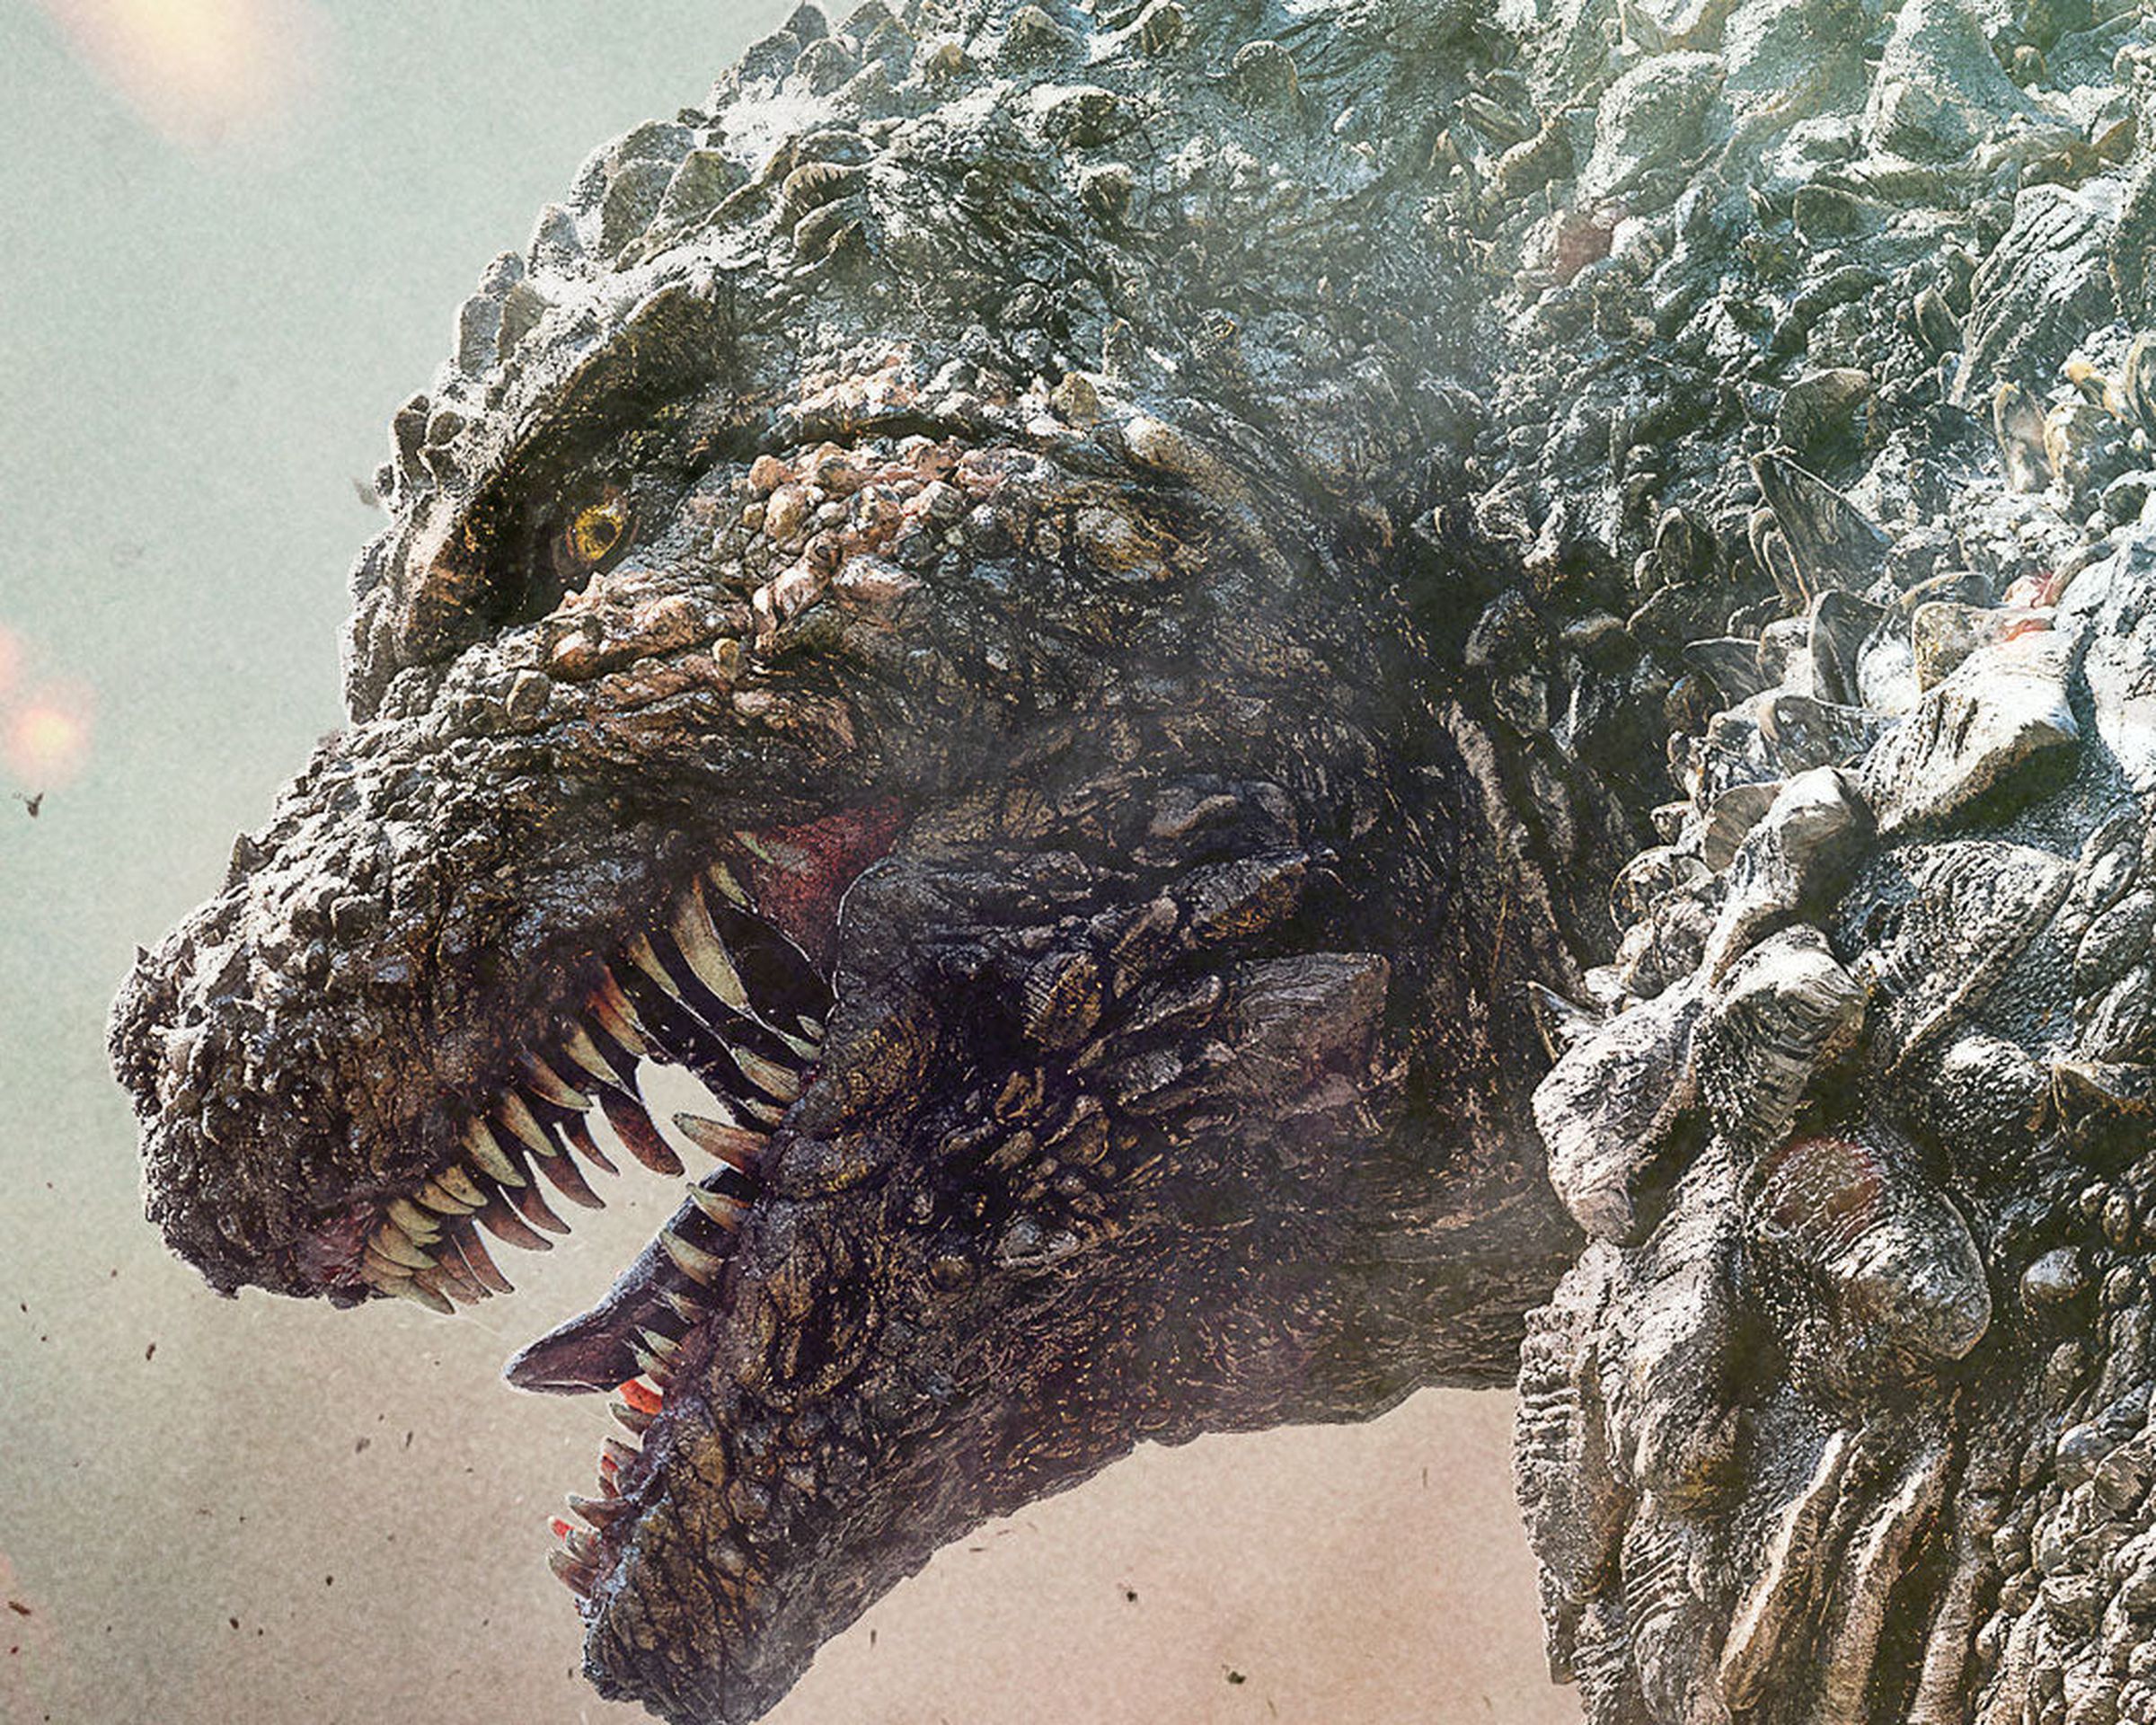 A close-up of Godzilla from the film.